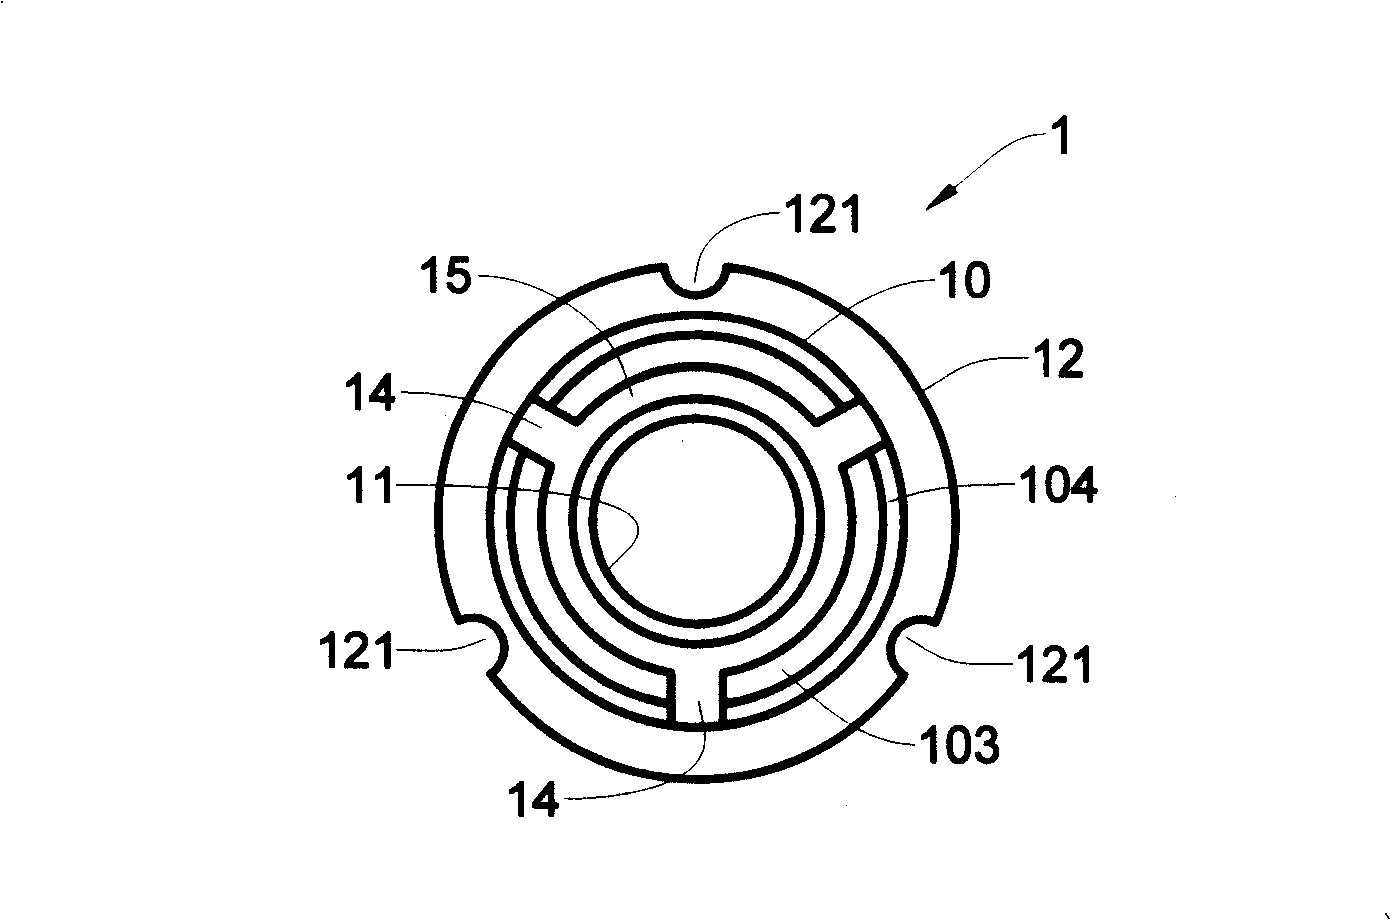 Oil-contained bearing